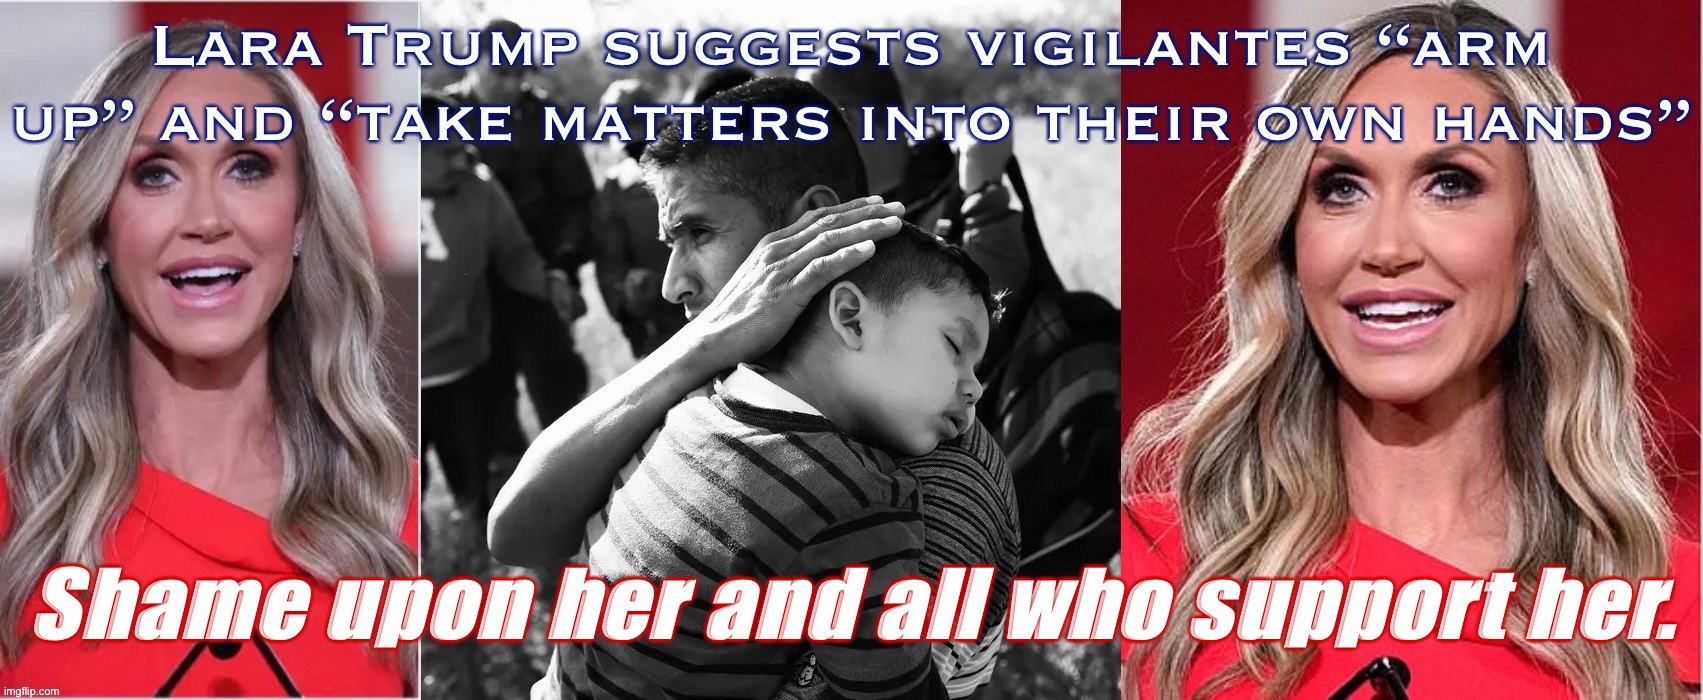 How can you tell someone’s “illegal” by looking at them? You can’t. Effectively she declared open season on brown people. Shame. | Lara Trump suggests vigilantes “arm up” and “take matters into their own hands”; Shame upon her and all who support her. | image tagged in lara trump bigot,racist,racism,bigotry,bigot,genocide | made w/ Imgflip meme maker